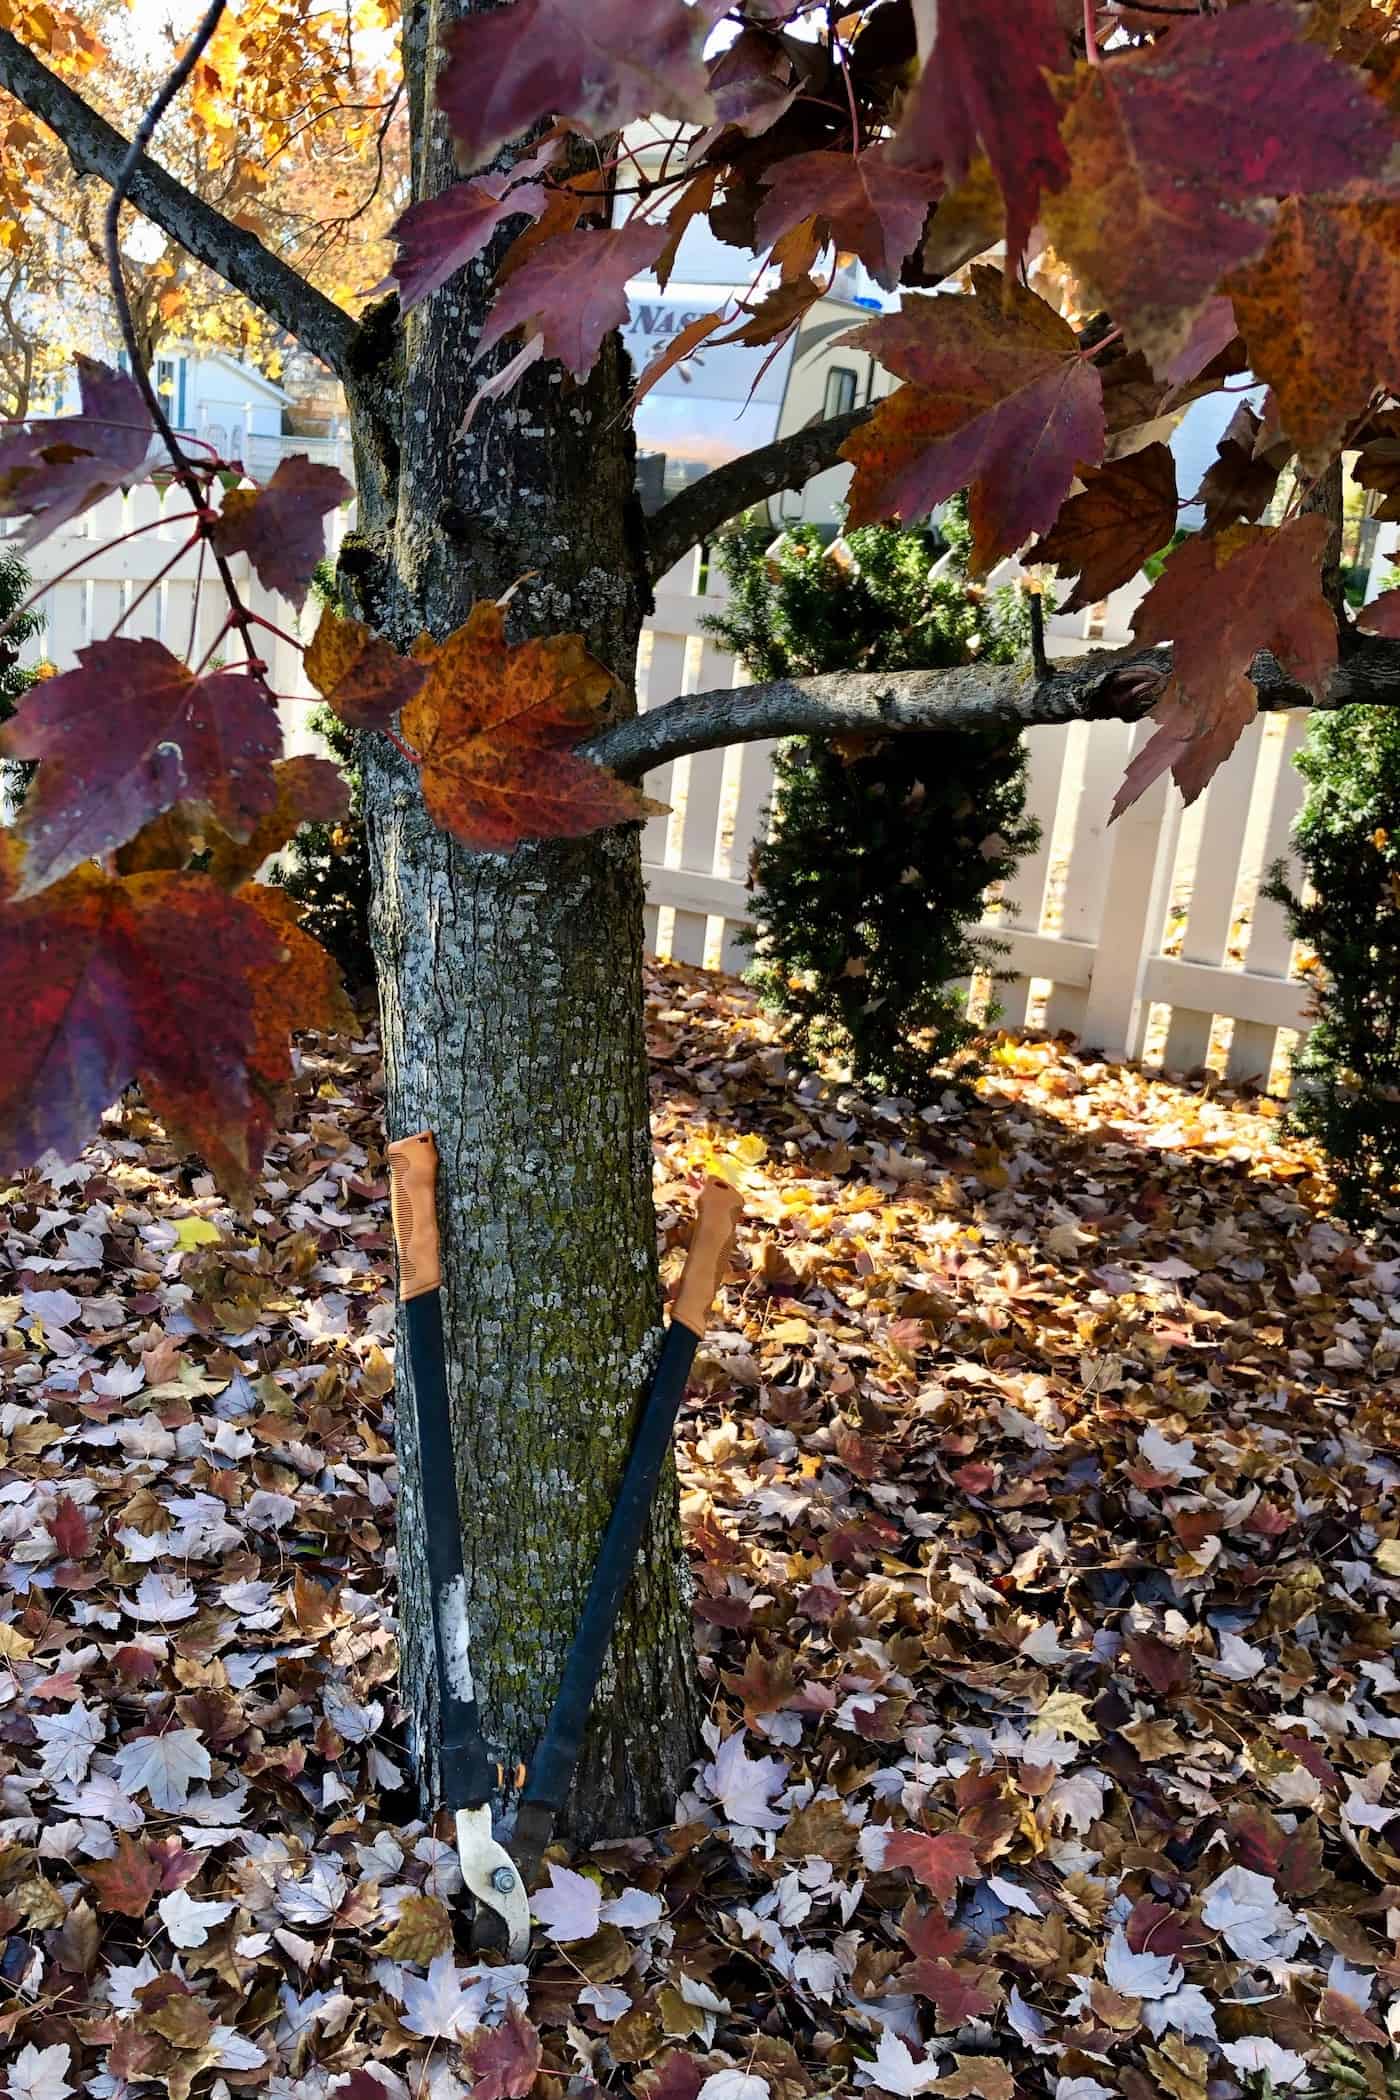 Pruning trees in the fall should be avoided